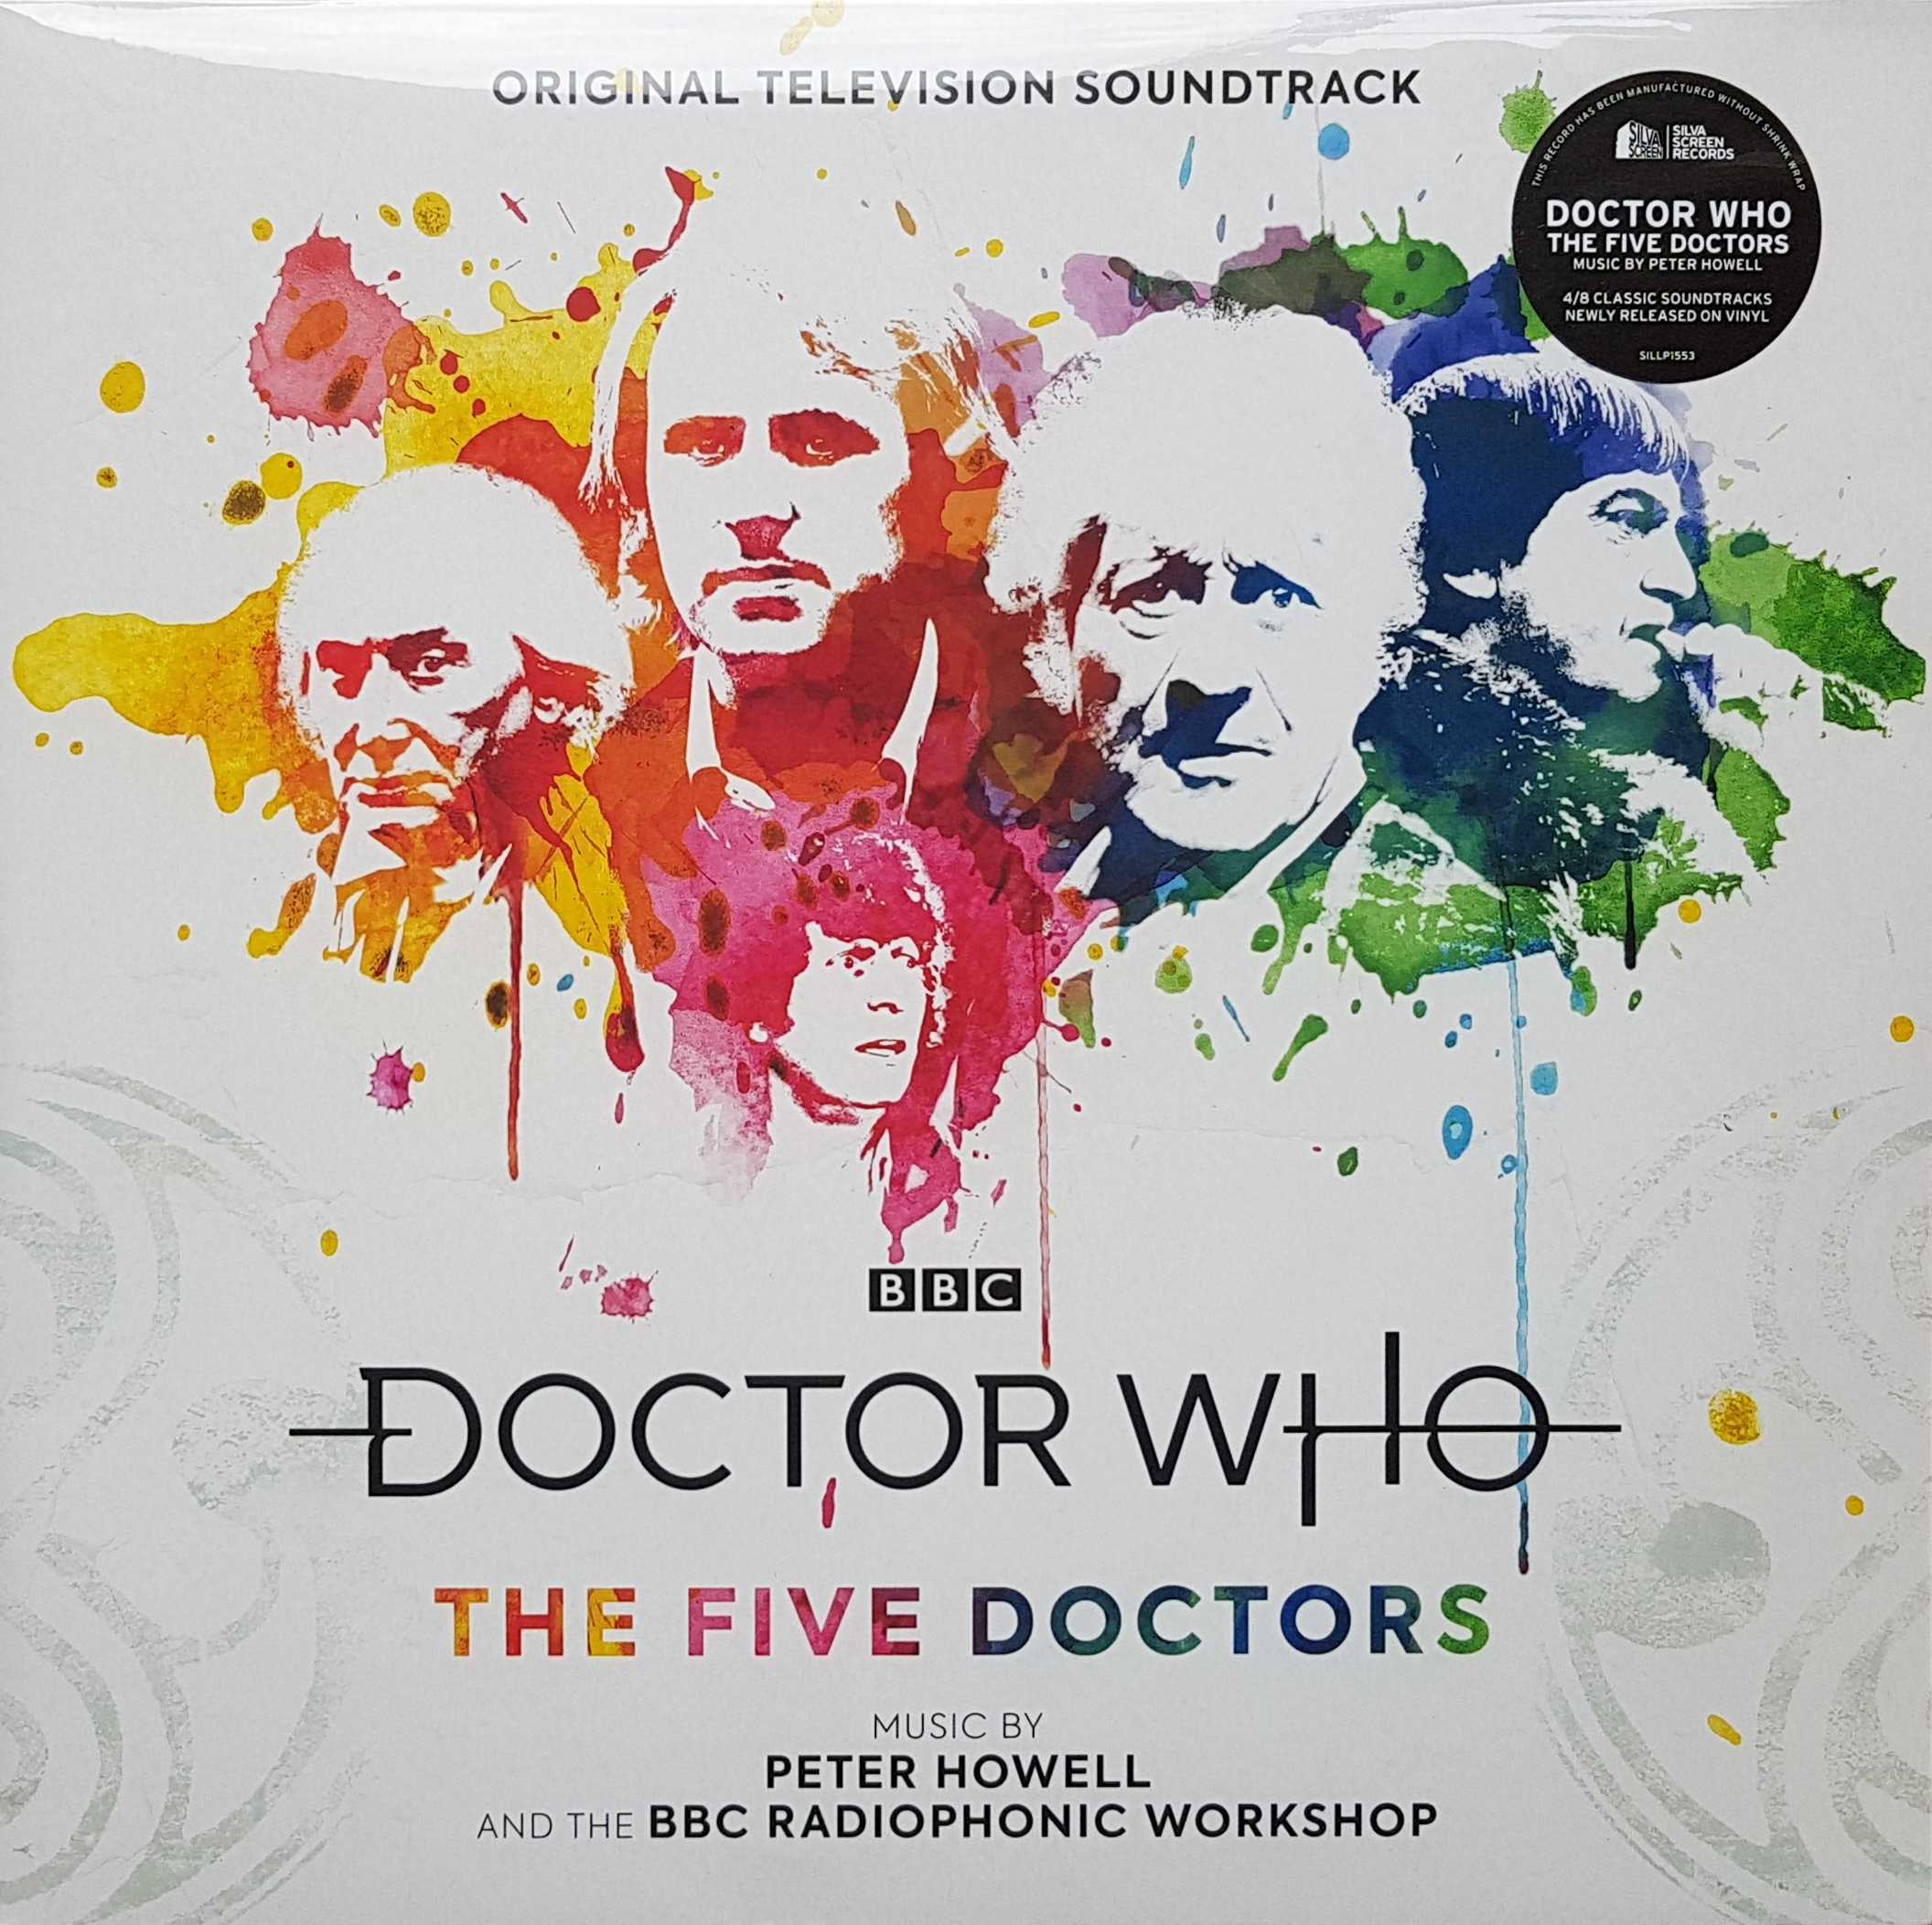 Picture of Doctor Who - The five Doctors by artist Peter Howell and the BBC Radiophonic Workshop from the BBC albums - Records and Tapes library